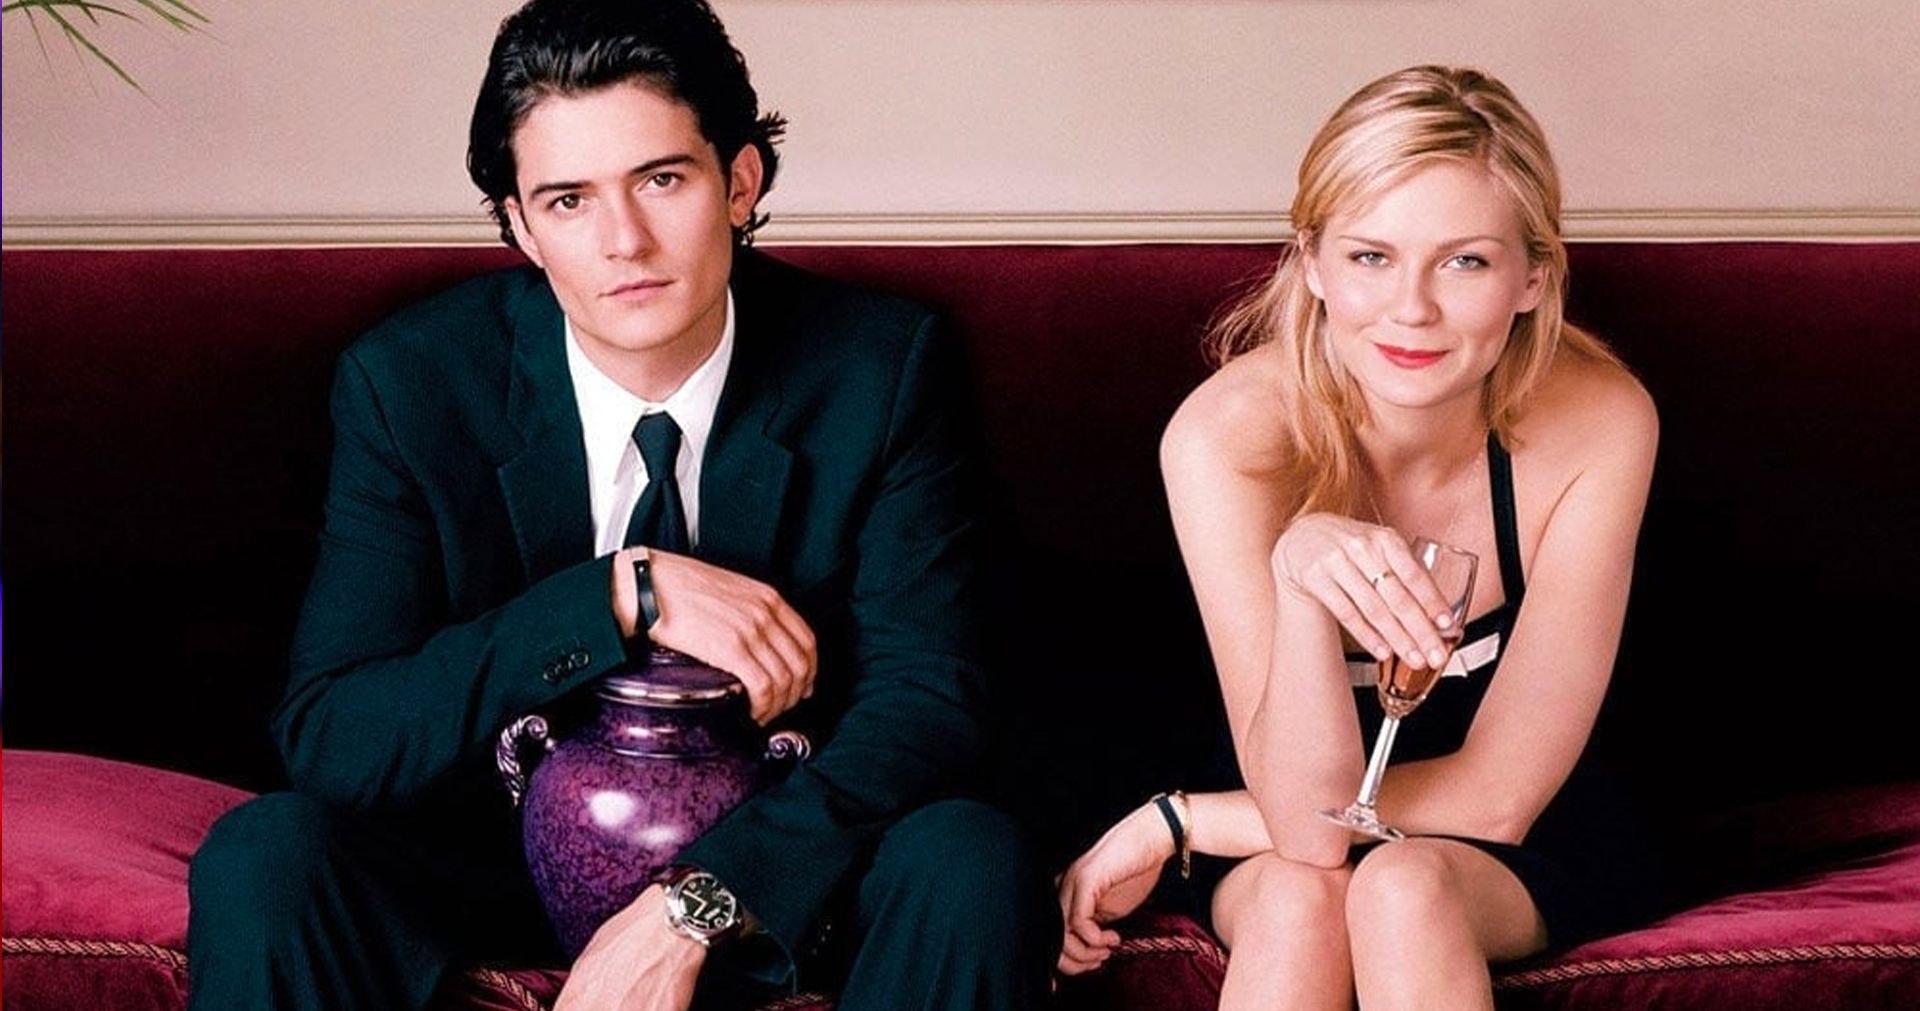 Elizabethtown Blu-ray Feature: Cameron Crowe Talks About Casting Orlando Bloom [Exclusive]